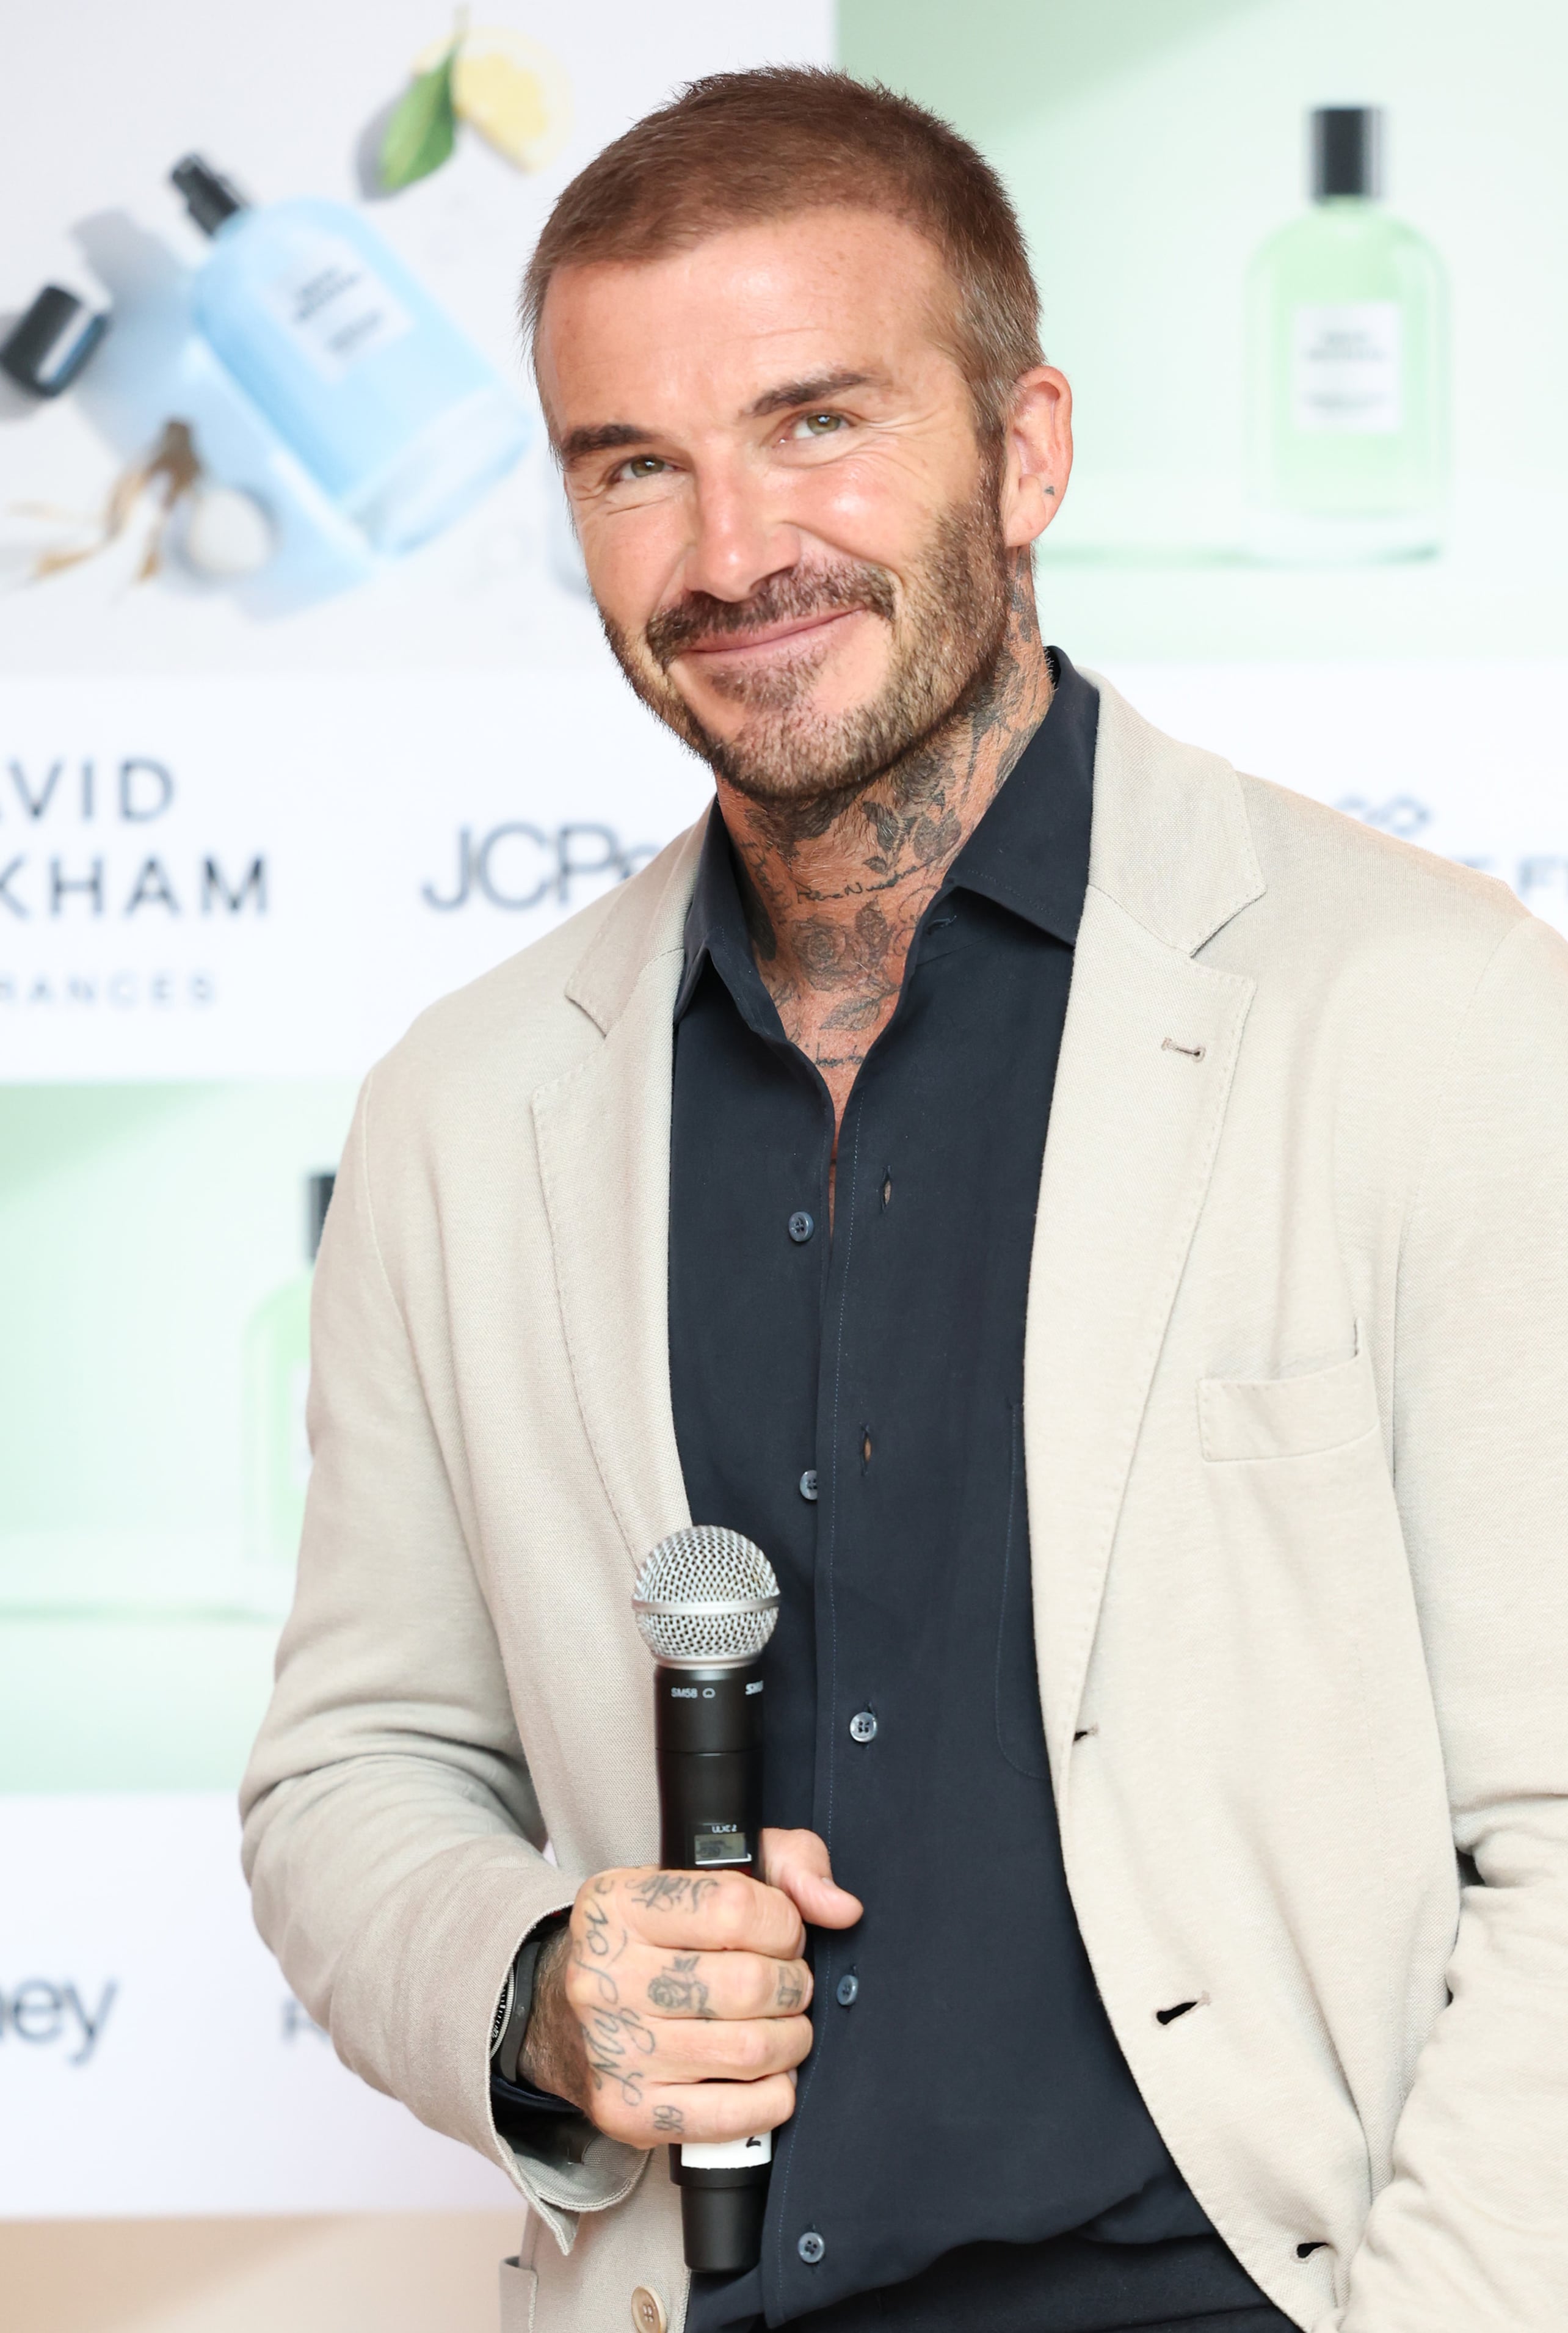 David Beckham Shows Off Unreleased Fear of God Adidas Collection